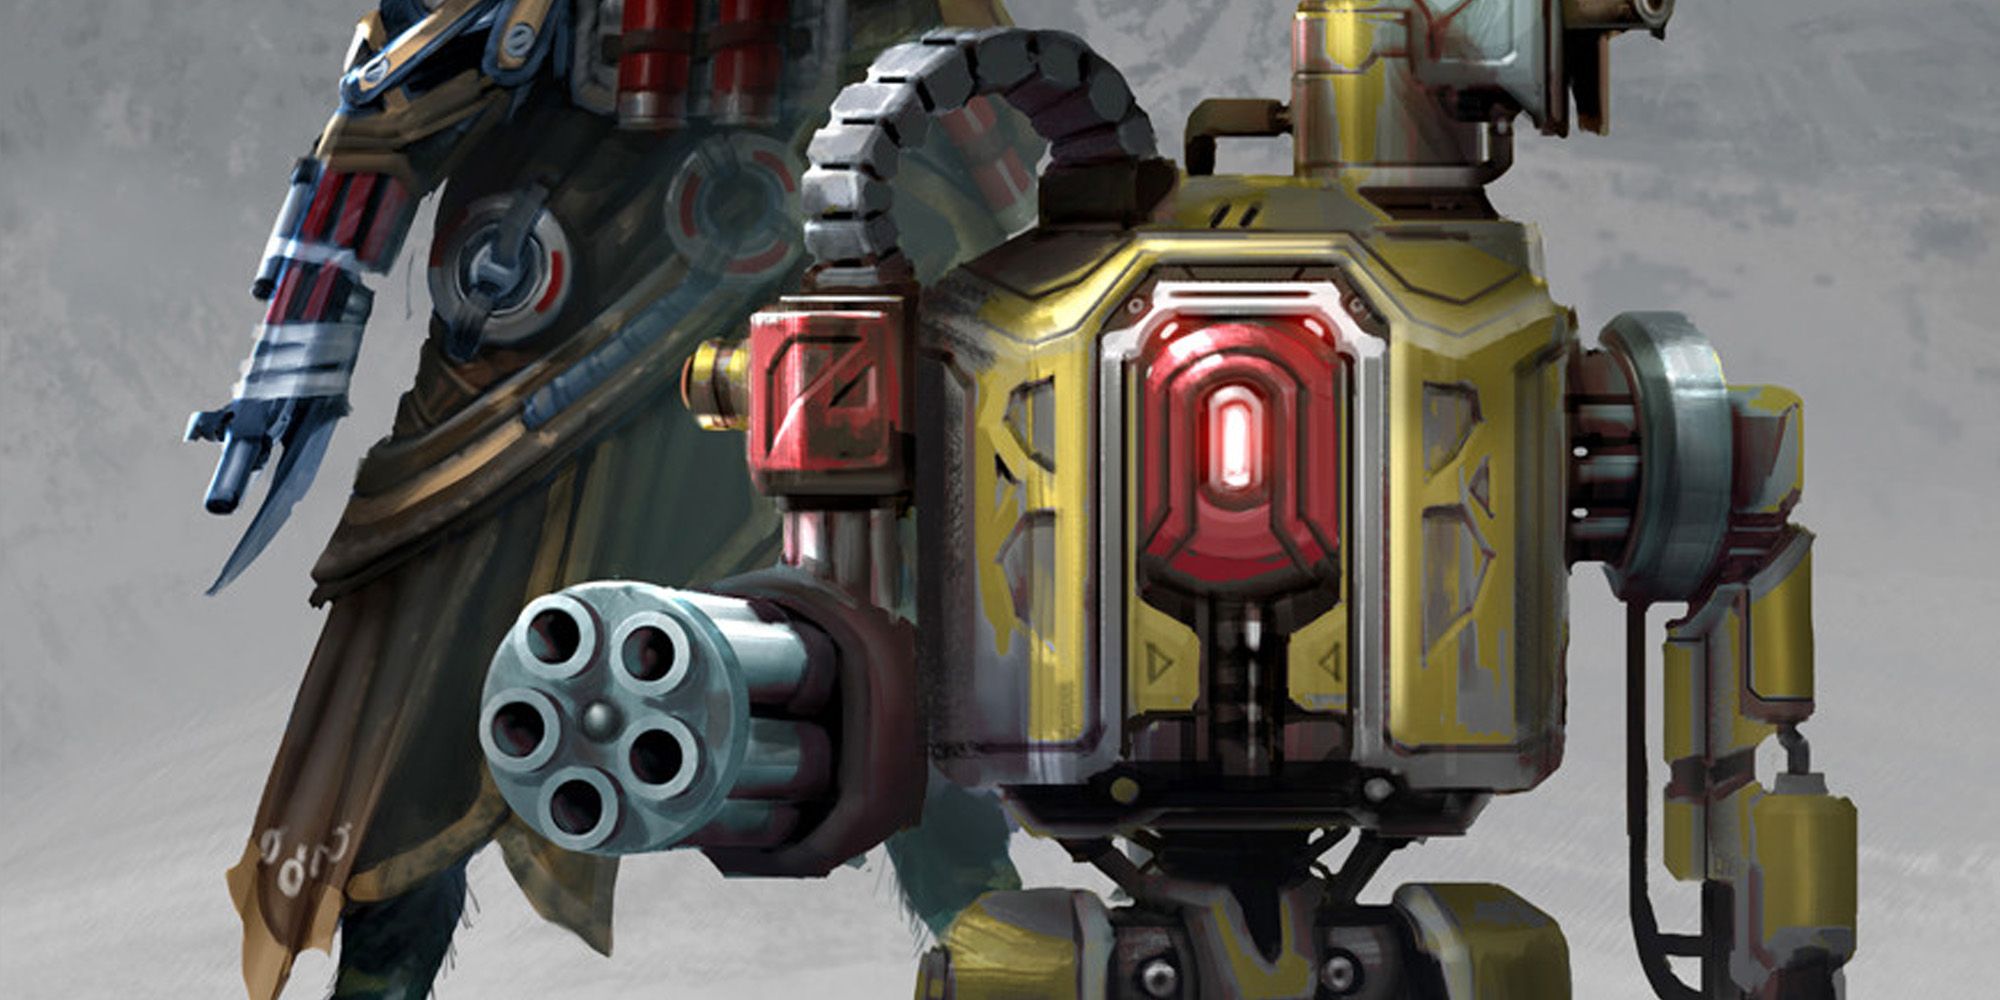 Starfinder Drone Companion holding out a five barrel gun